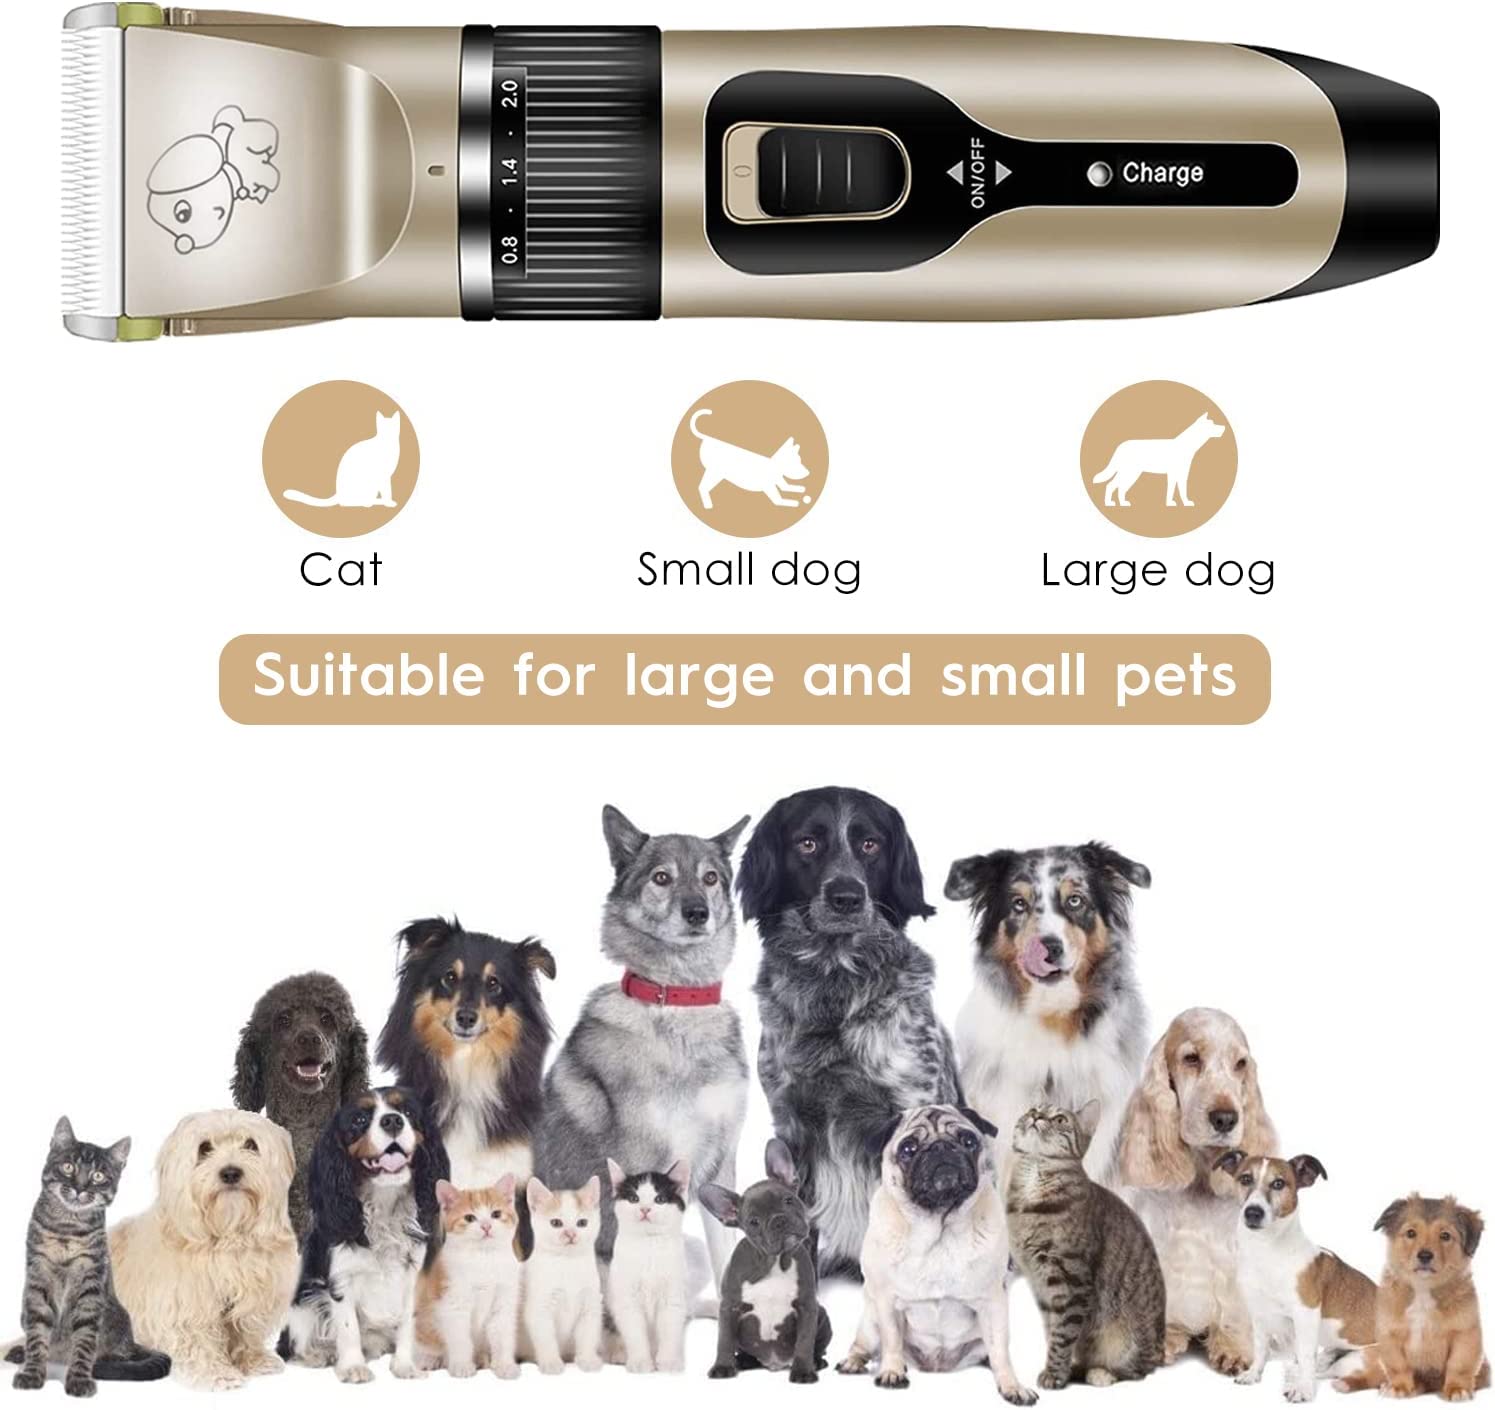 Dog Grooming 9IN1 Pet Hair Clippers, Dog Grooming Kit